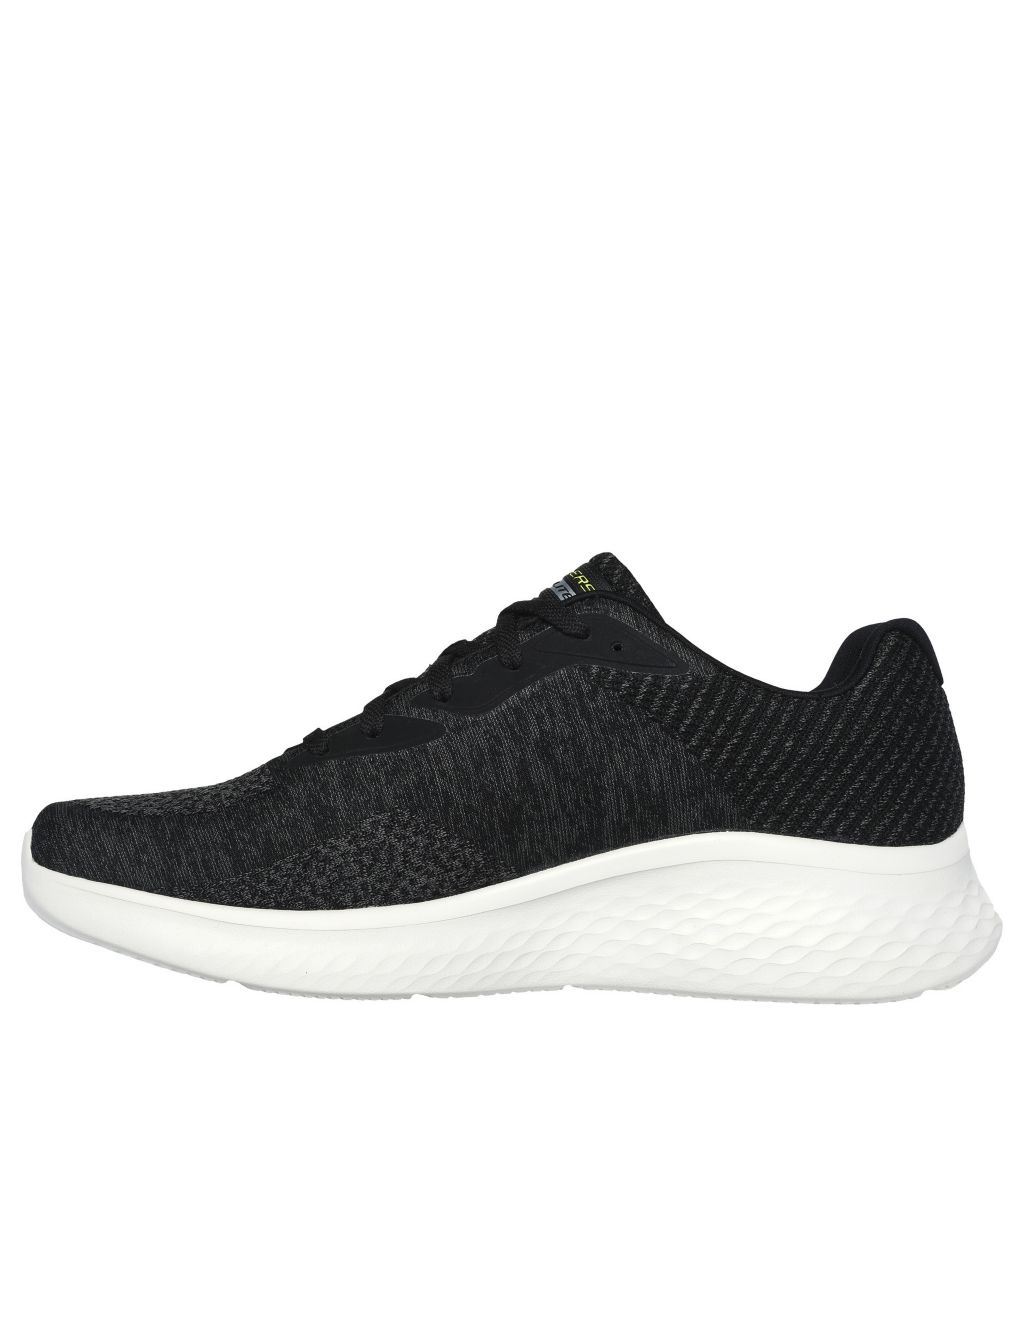 Skech-Lite Pro Faregrove Lace Up Trainers image 4